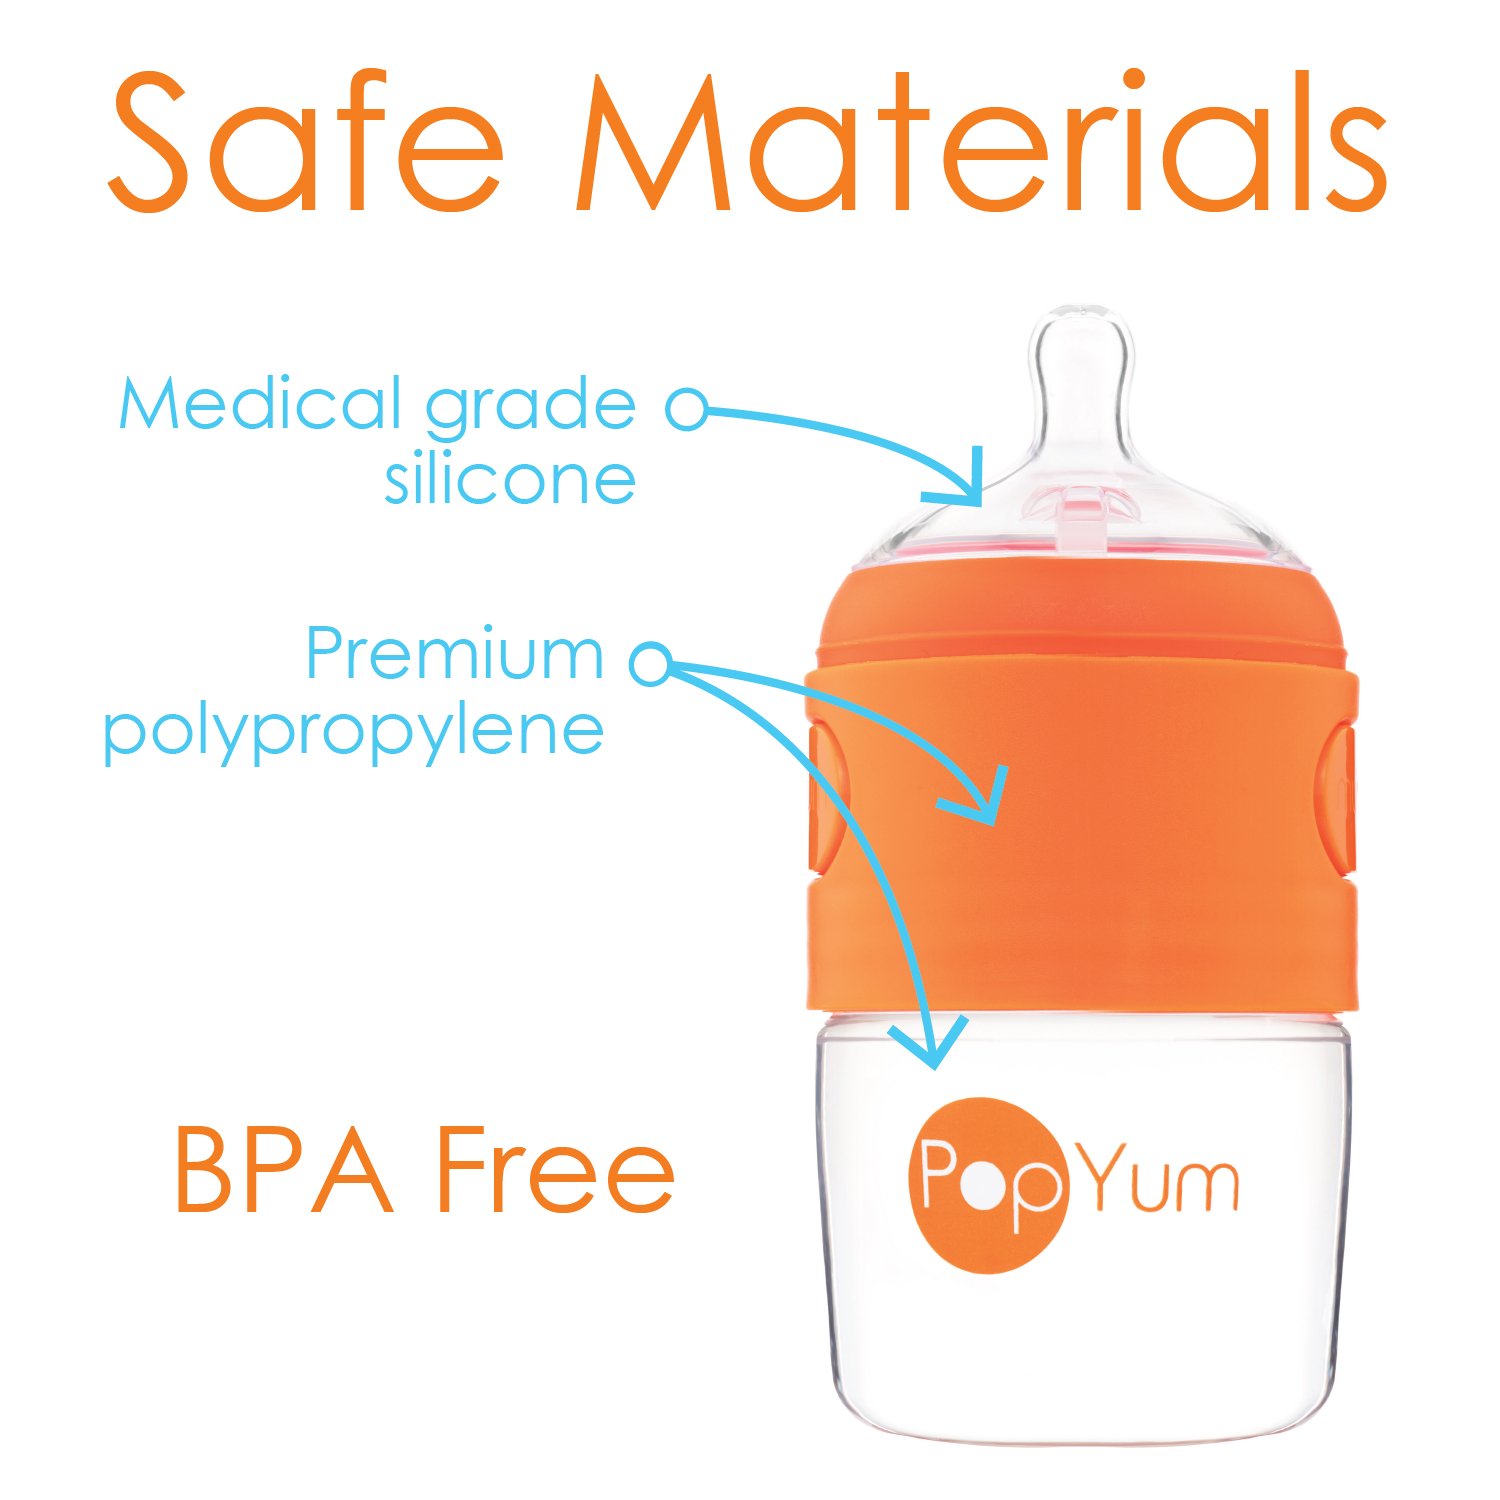 Looking to Buy Popyum Bottles: 10 Must-Know Tips for Finding Popyum Bottles Near You